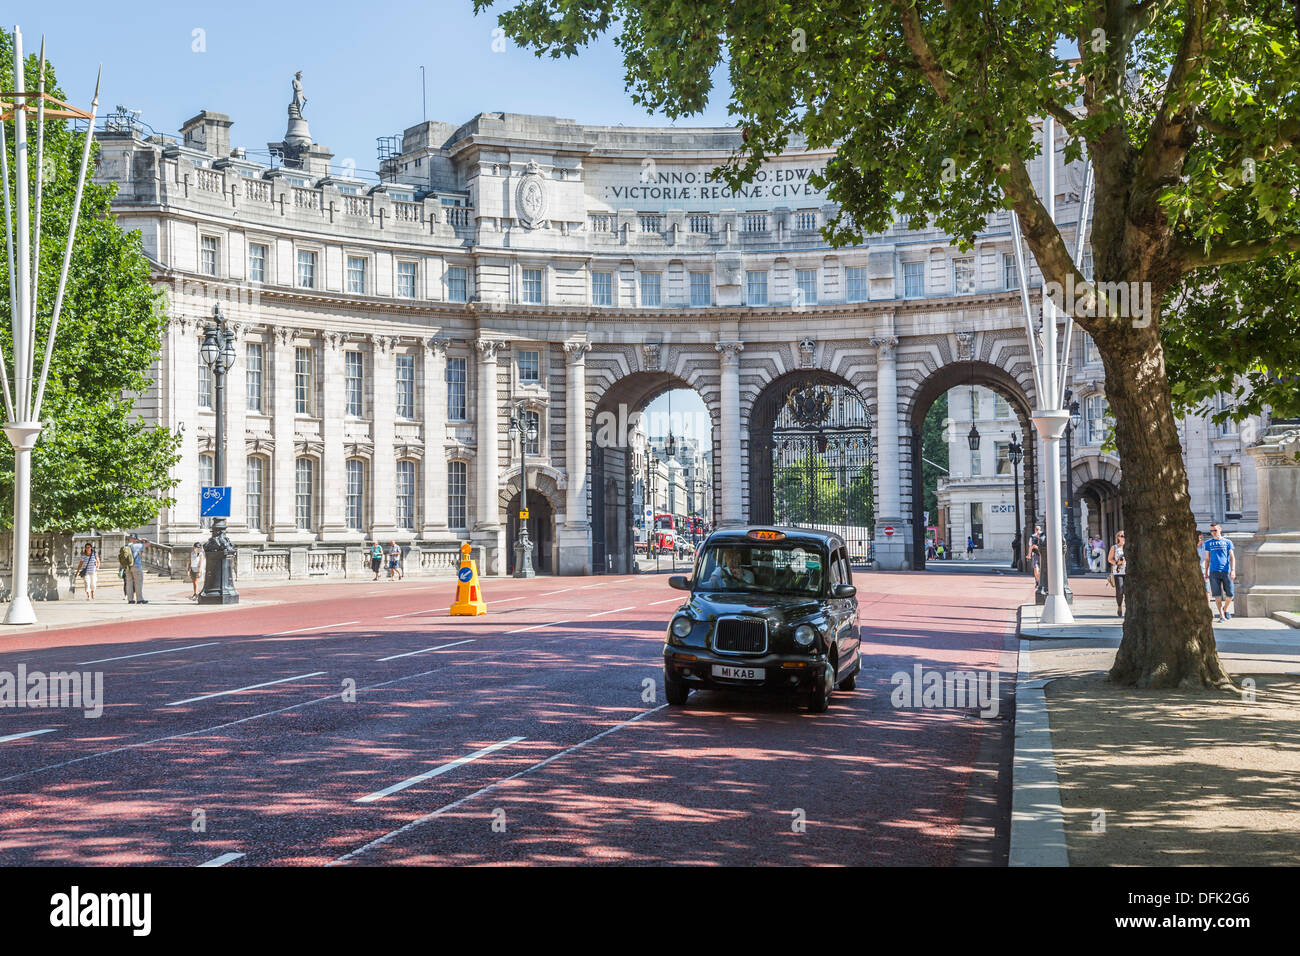 Admiralty Arch, at end of The Mall, West End, London, UK, with iconic black cab (the number of which is the amusing 'M1 KAB') Stock Photo